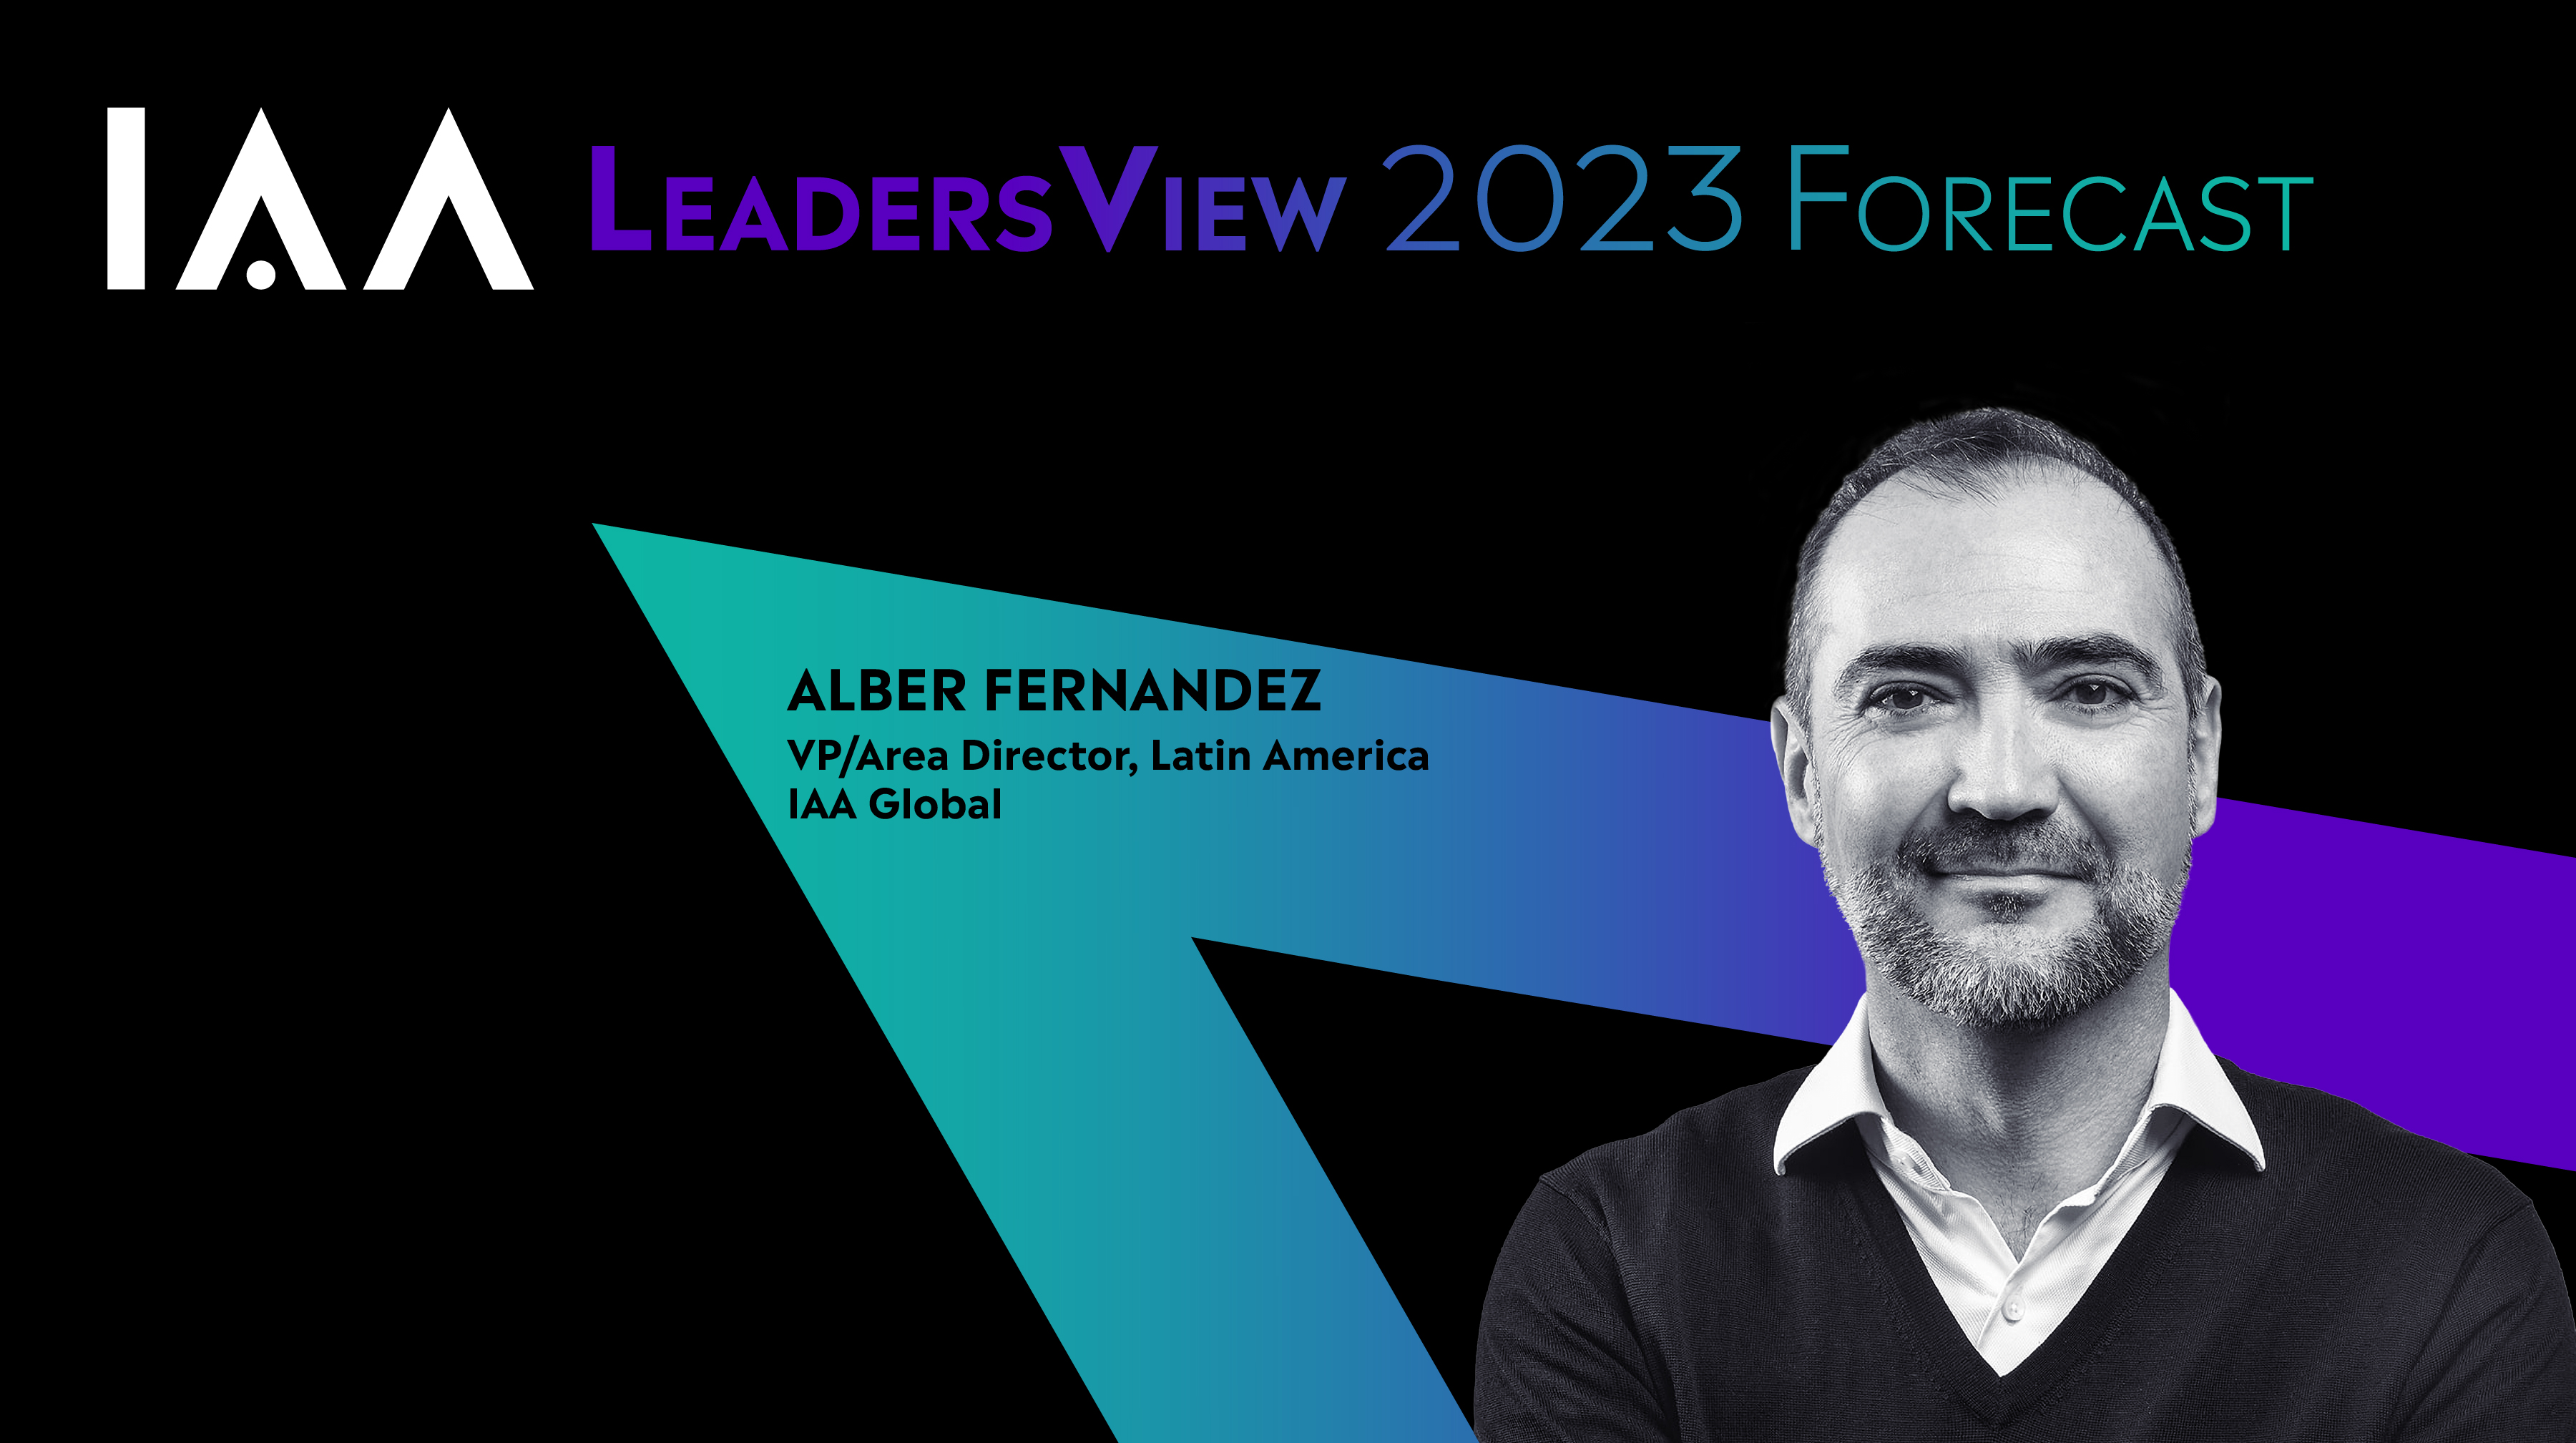 Leaders view 2023 forecast